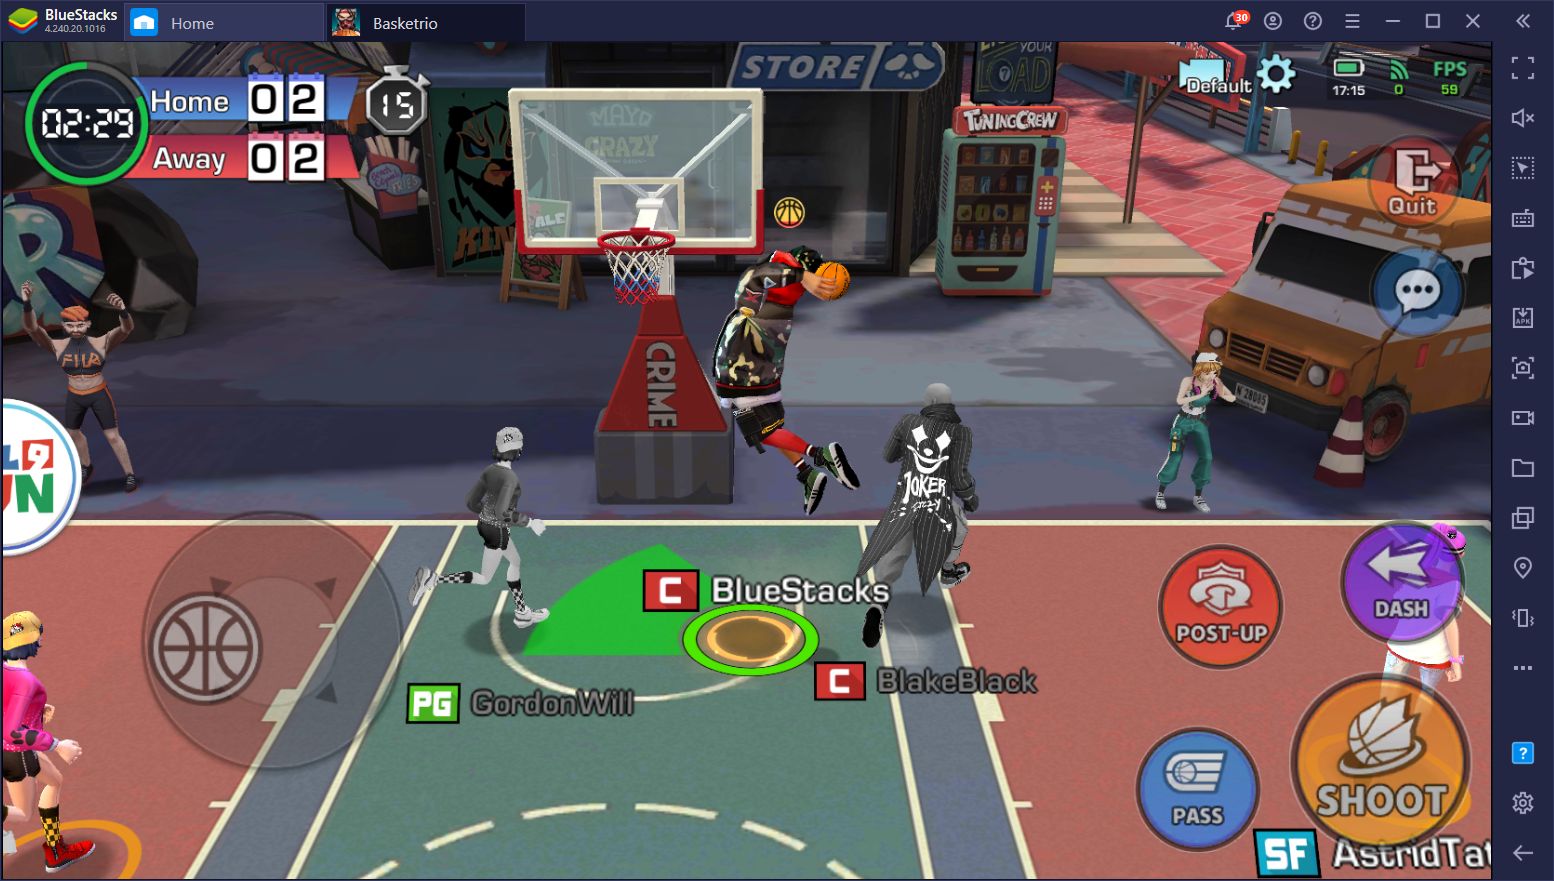 Basketrio on PC - The Best Beginner Tips and Tricks for this New Mobile Basketball Game